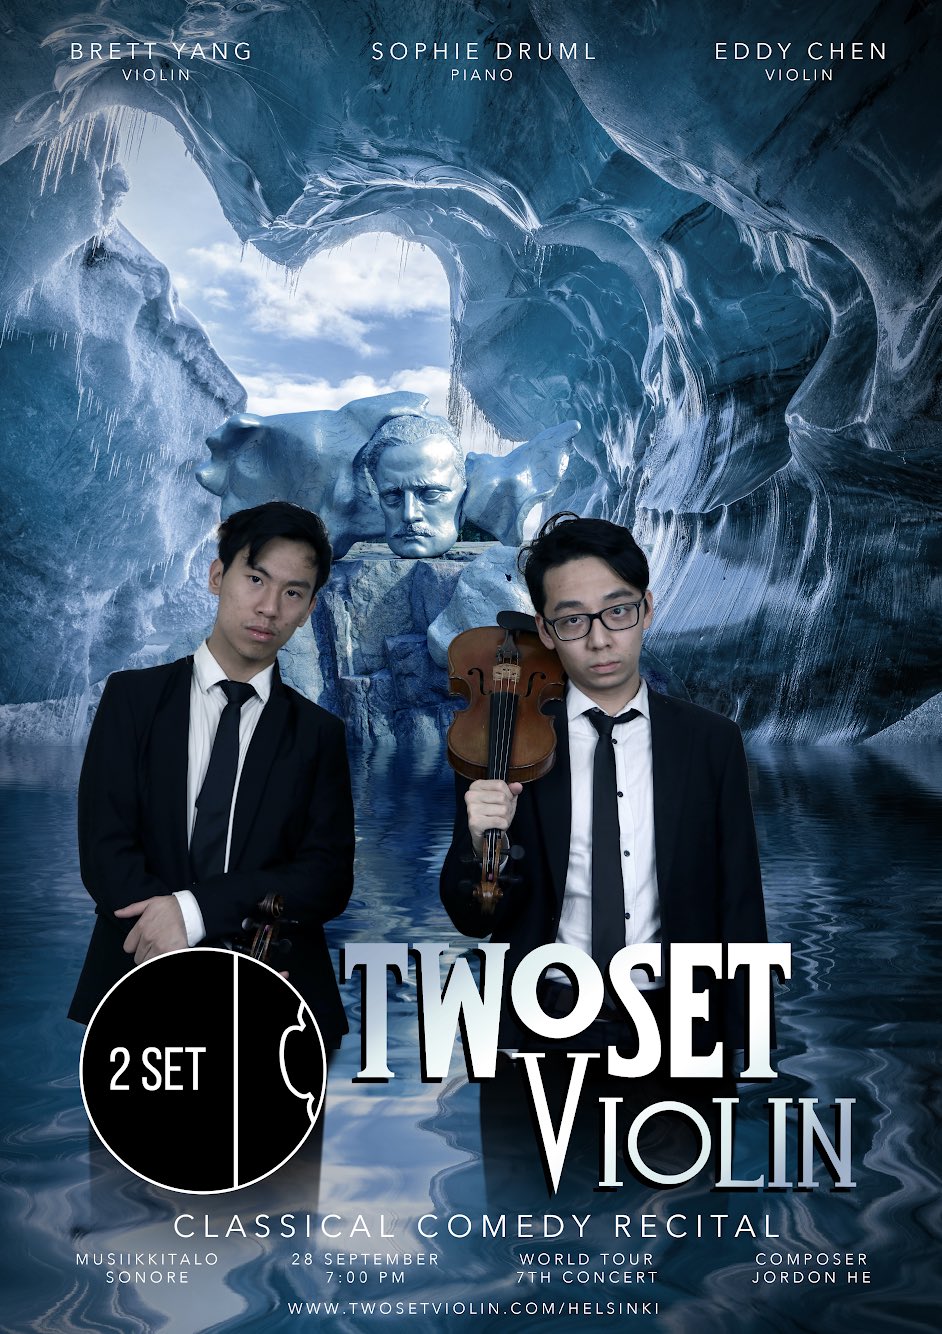 TwoSet Violin on Twitter: are out for Helsinki!! https://t.co/u61CgDmOuN https://t.co/Aw6KmZmCXj" / Twitter